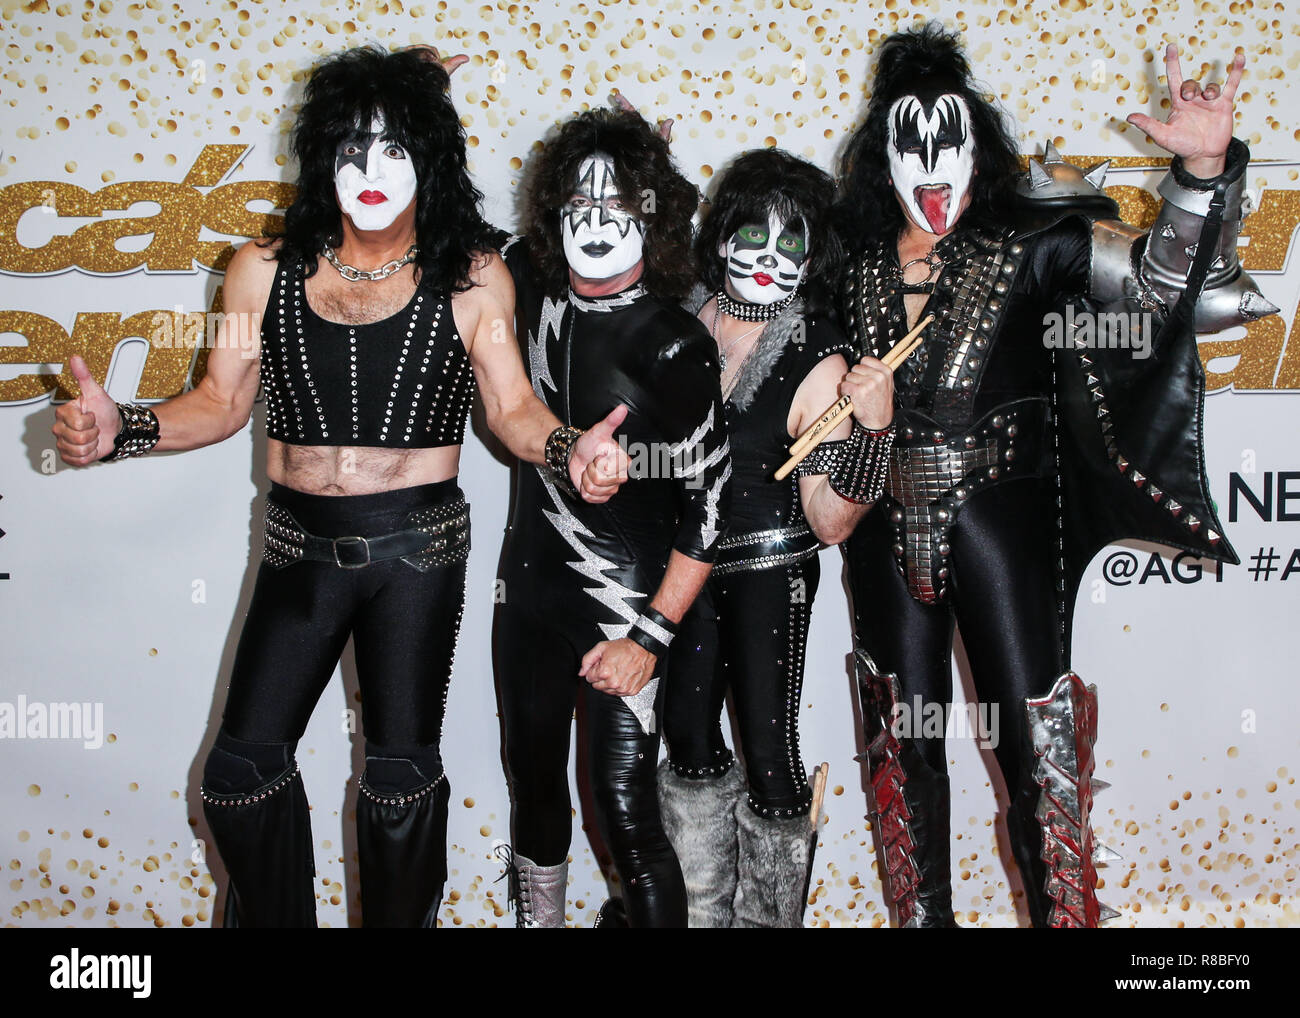 HOLLYWOOD, LOS ANGELES, CA, USA - SEPTEMBER 19: Paul Stanley, Tommy Thayer, Eric Singer, Gene Simmons, Kiss at the 'America's Got Talent' Season 13 Finale Live Show Red Carpet held at Dolby Theatre on September 19, 2018 in Hollywood, Los Angeles, California, United States. (Photo by Image Press Agency) Stock Photo